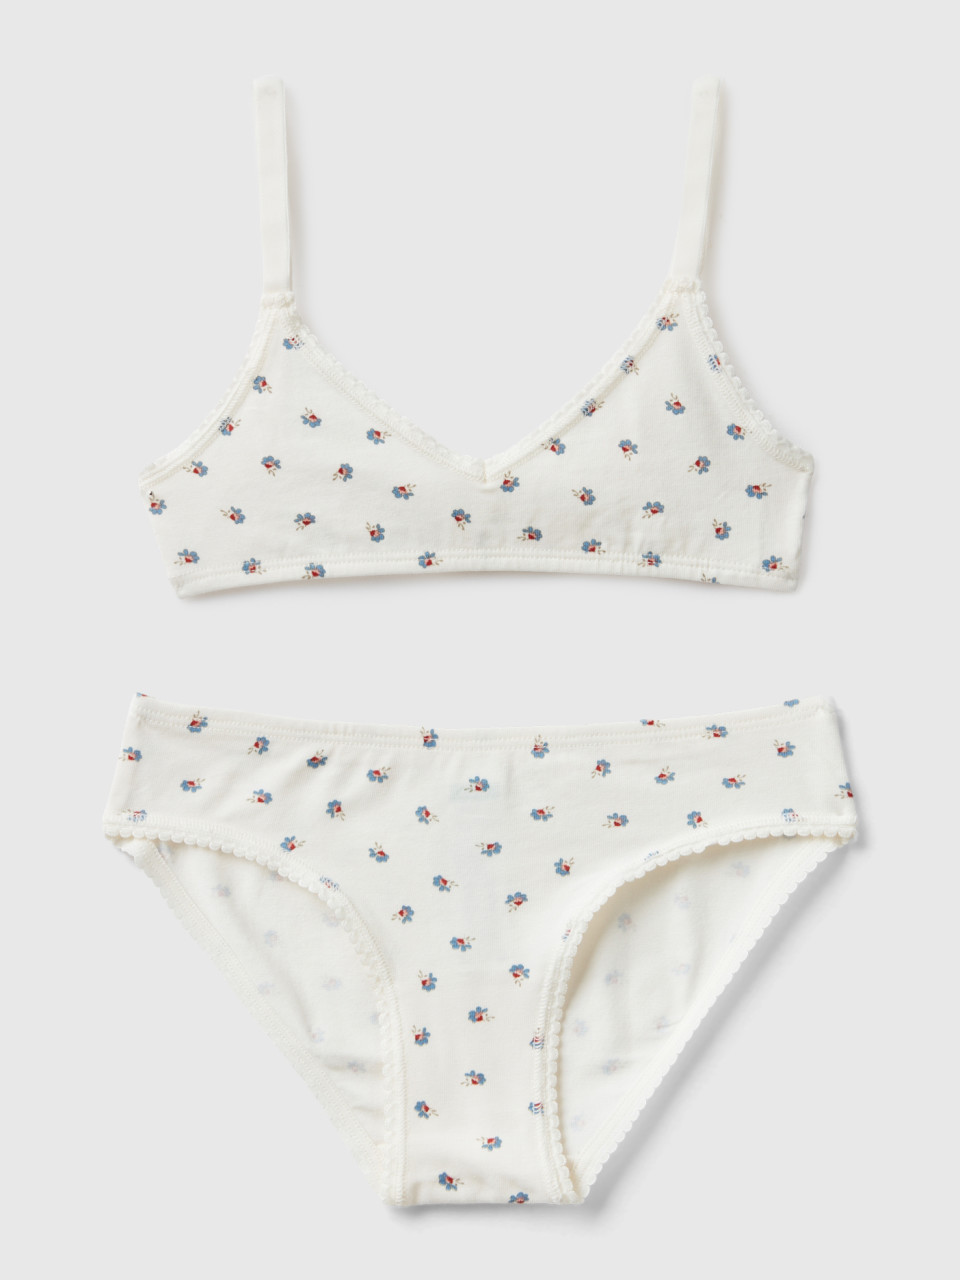 Benetton, Patterned Top And Underwear Set, Creamy White, Kids